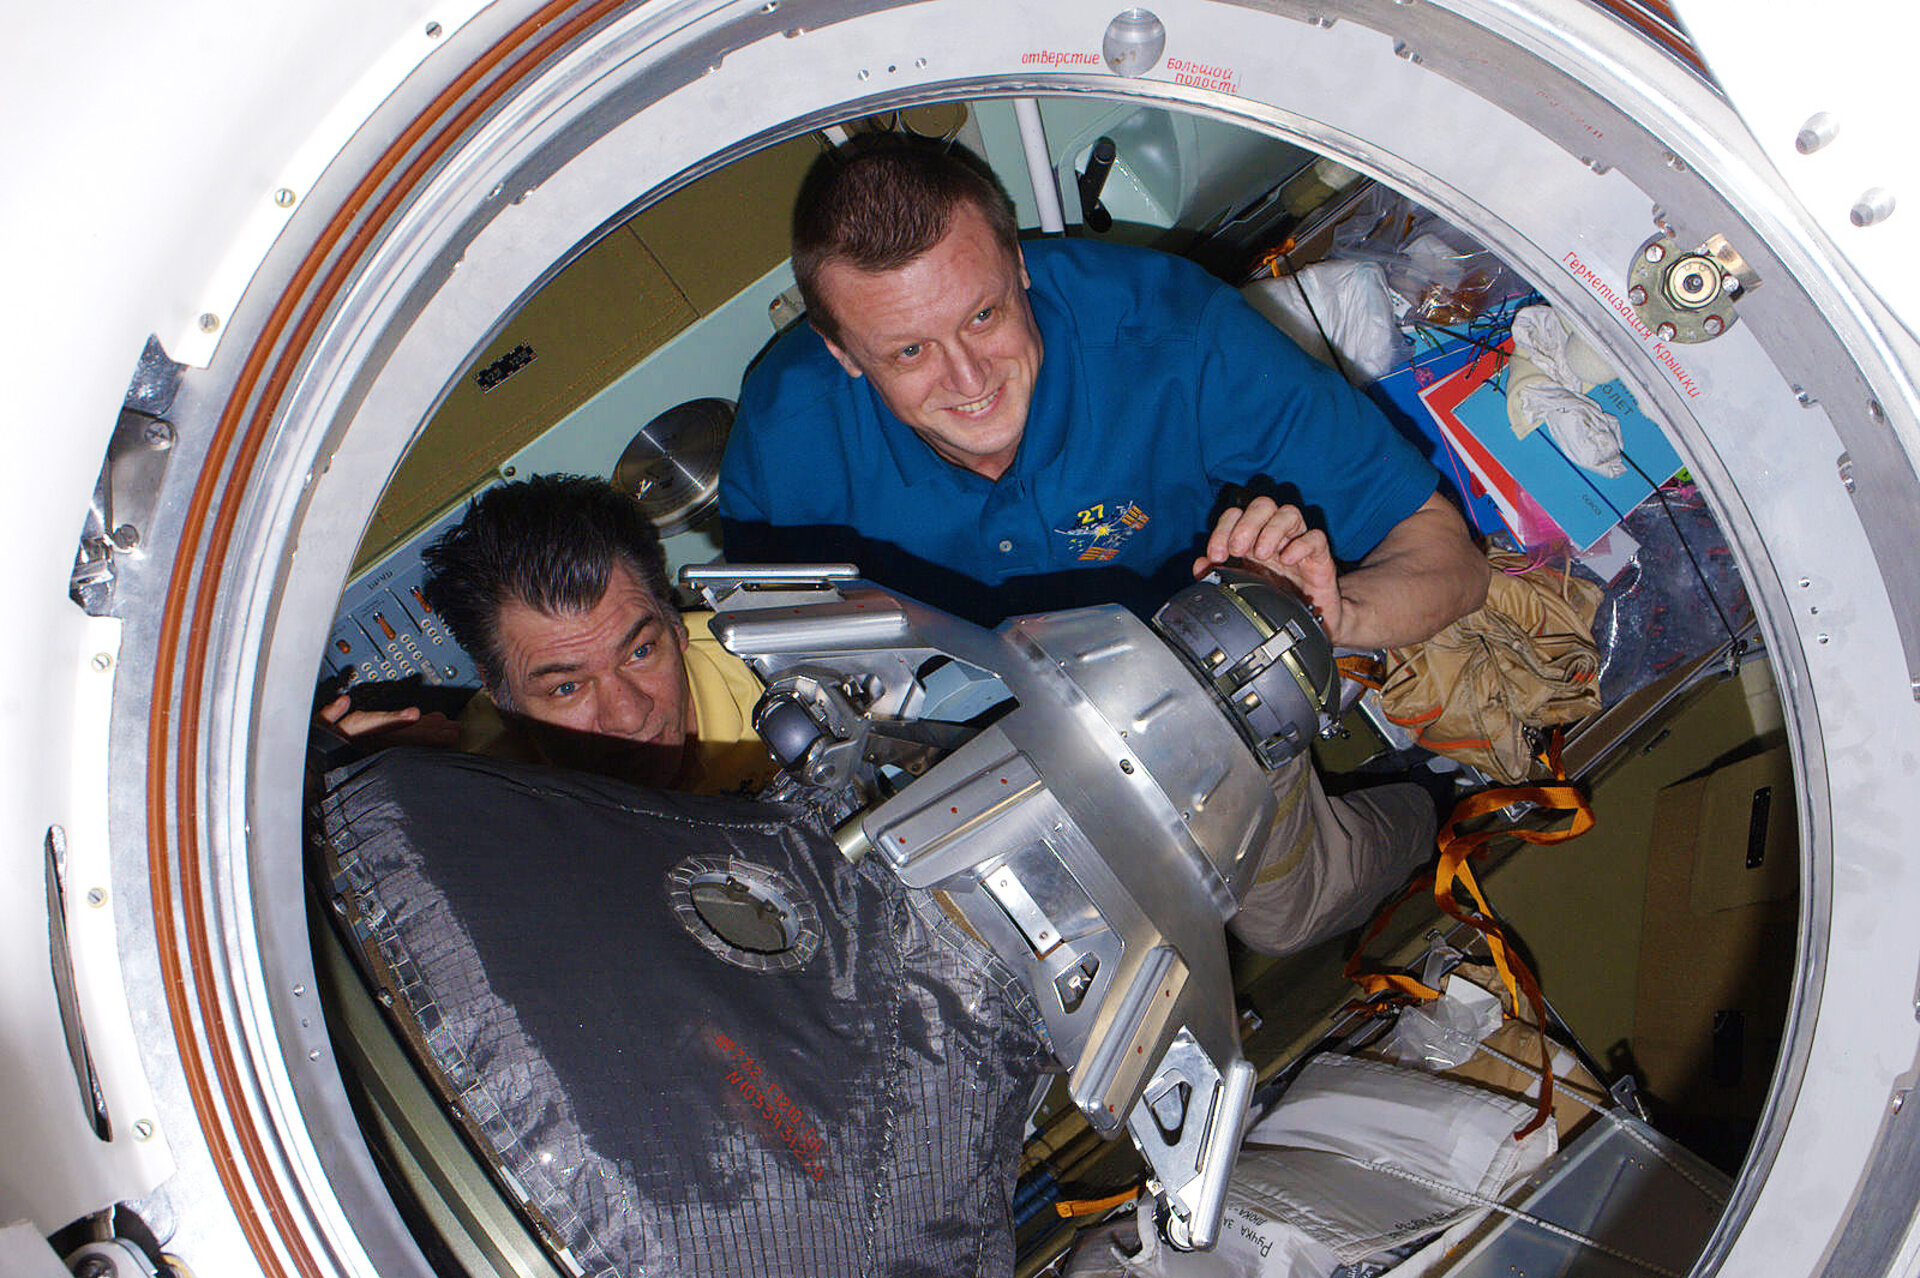 Dmitri and Paolo closing the Soyuz hatch